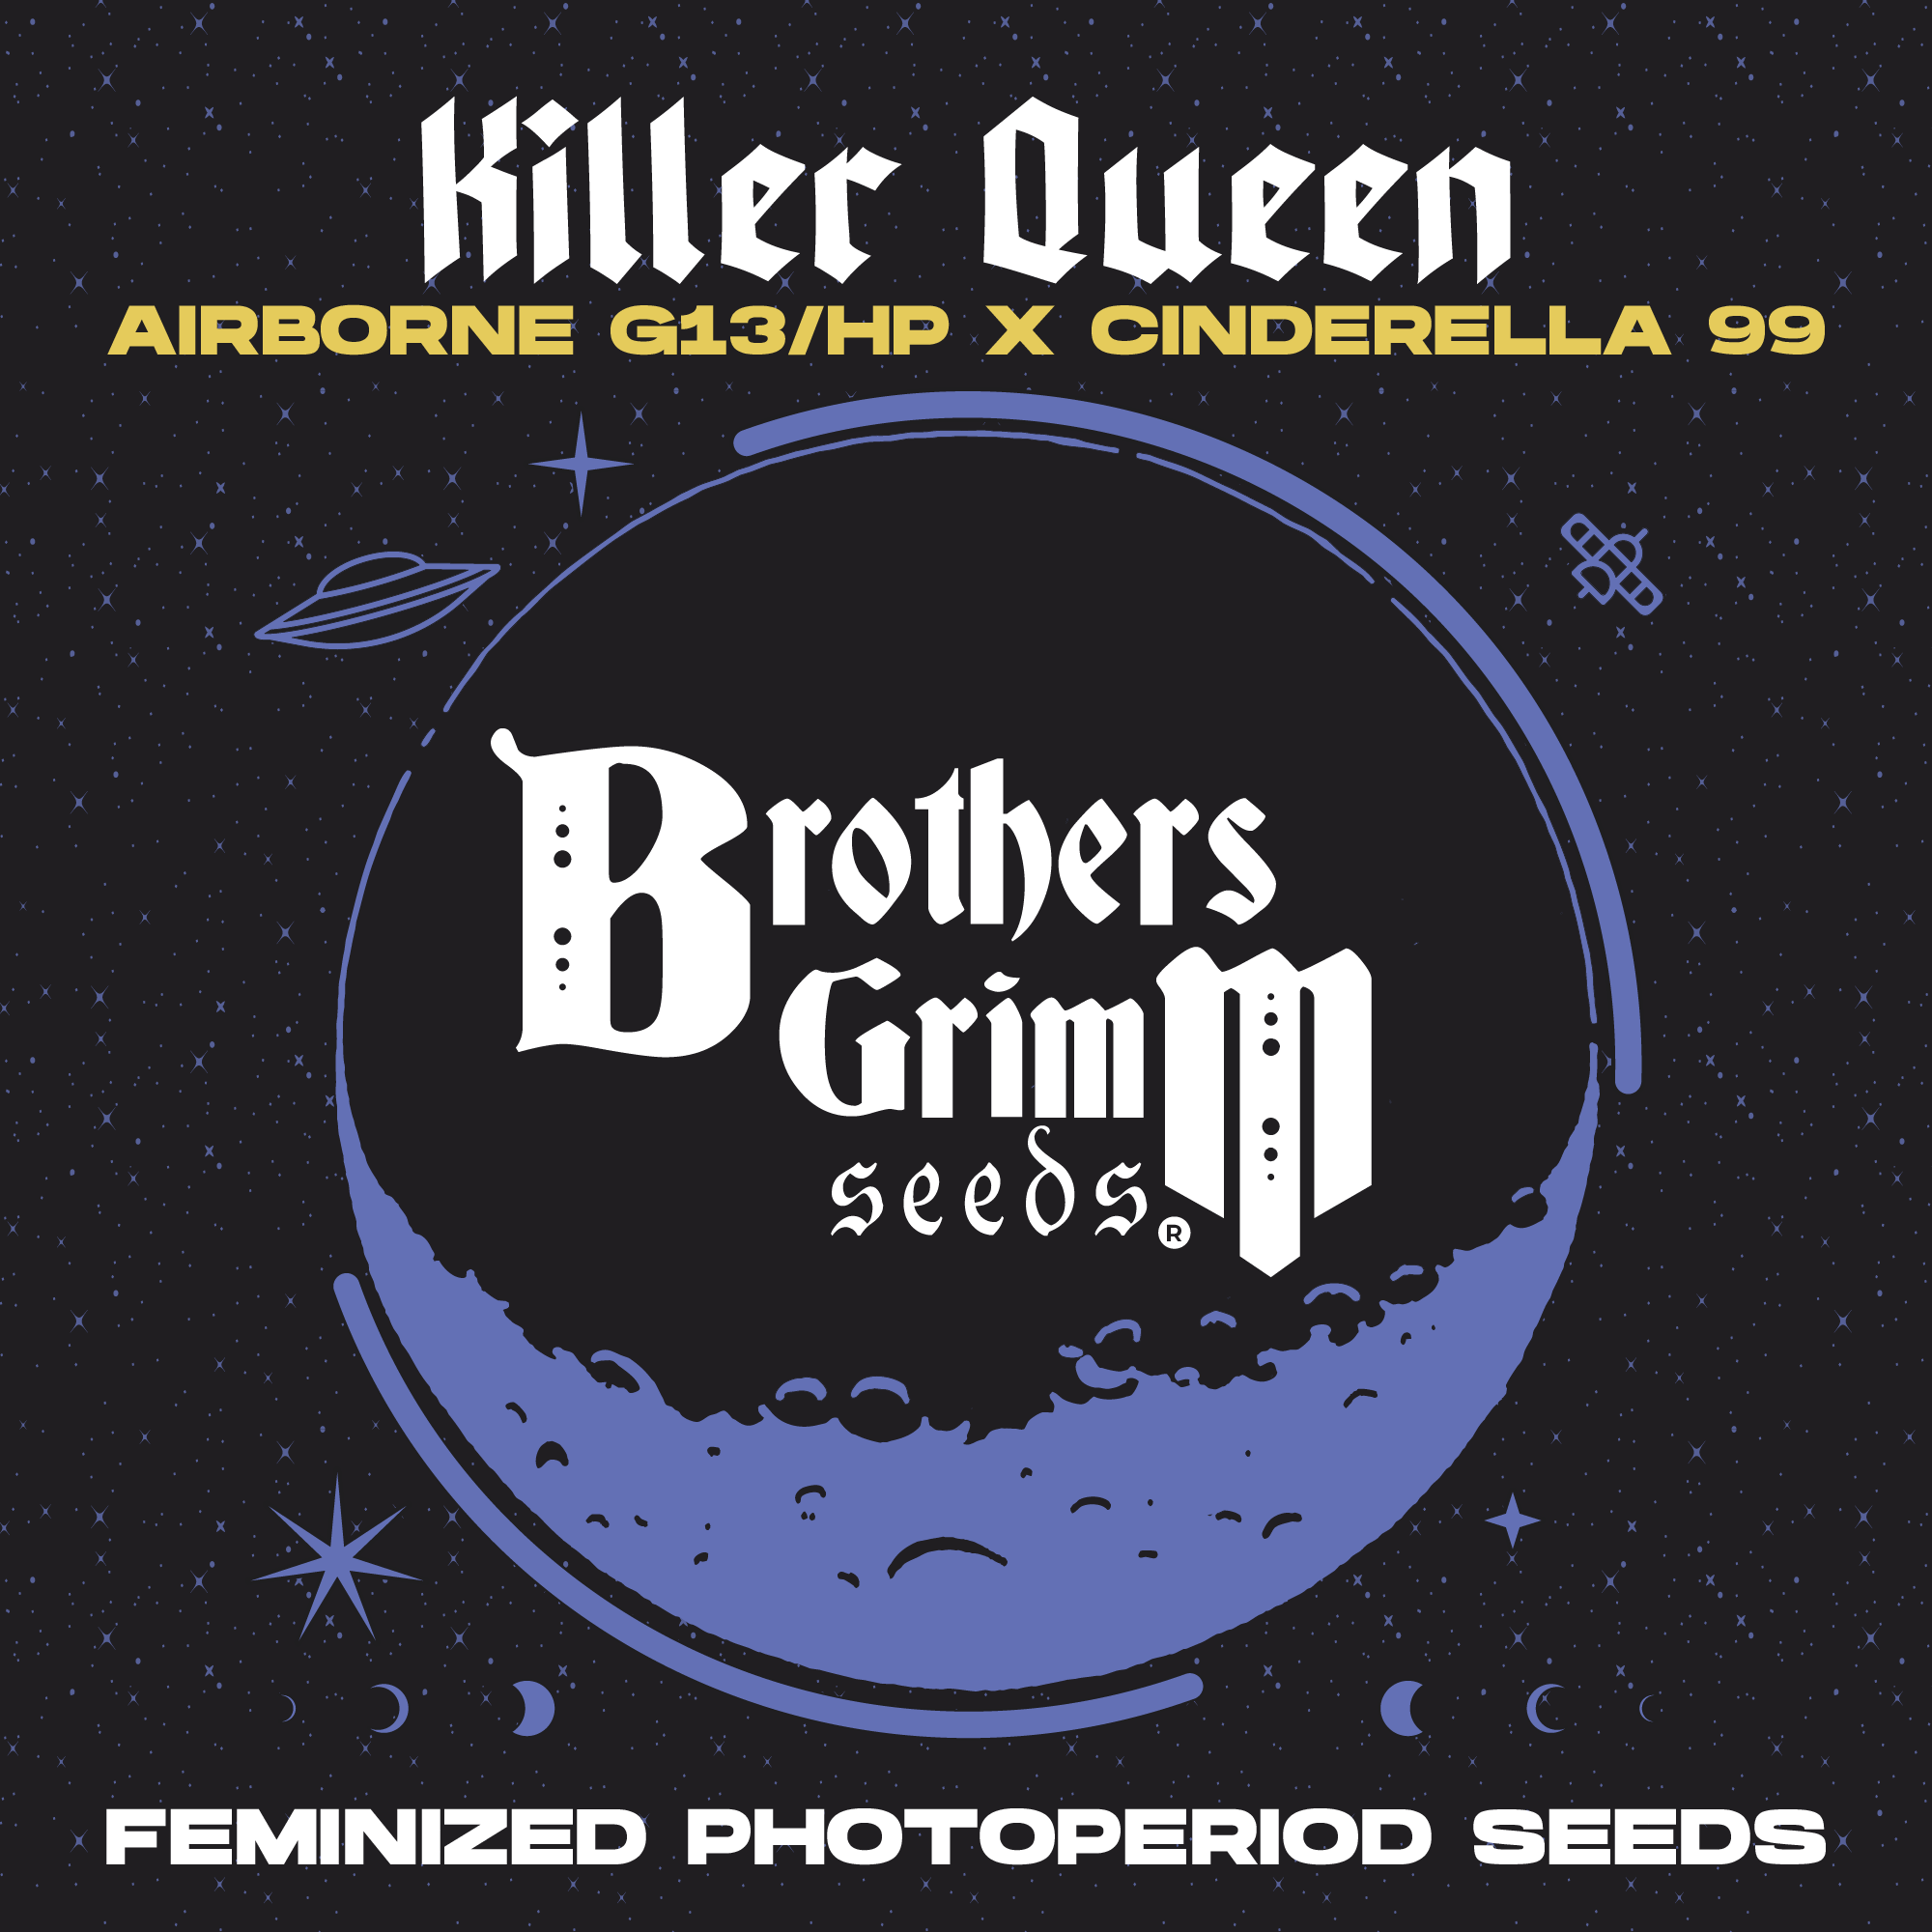 KillerQueen-Strain-by-Brothers-Grimm-Seeds